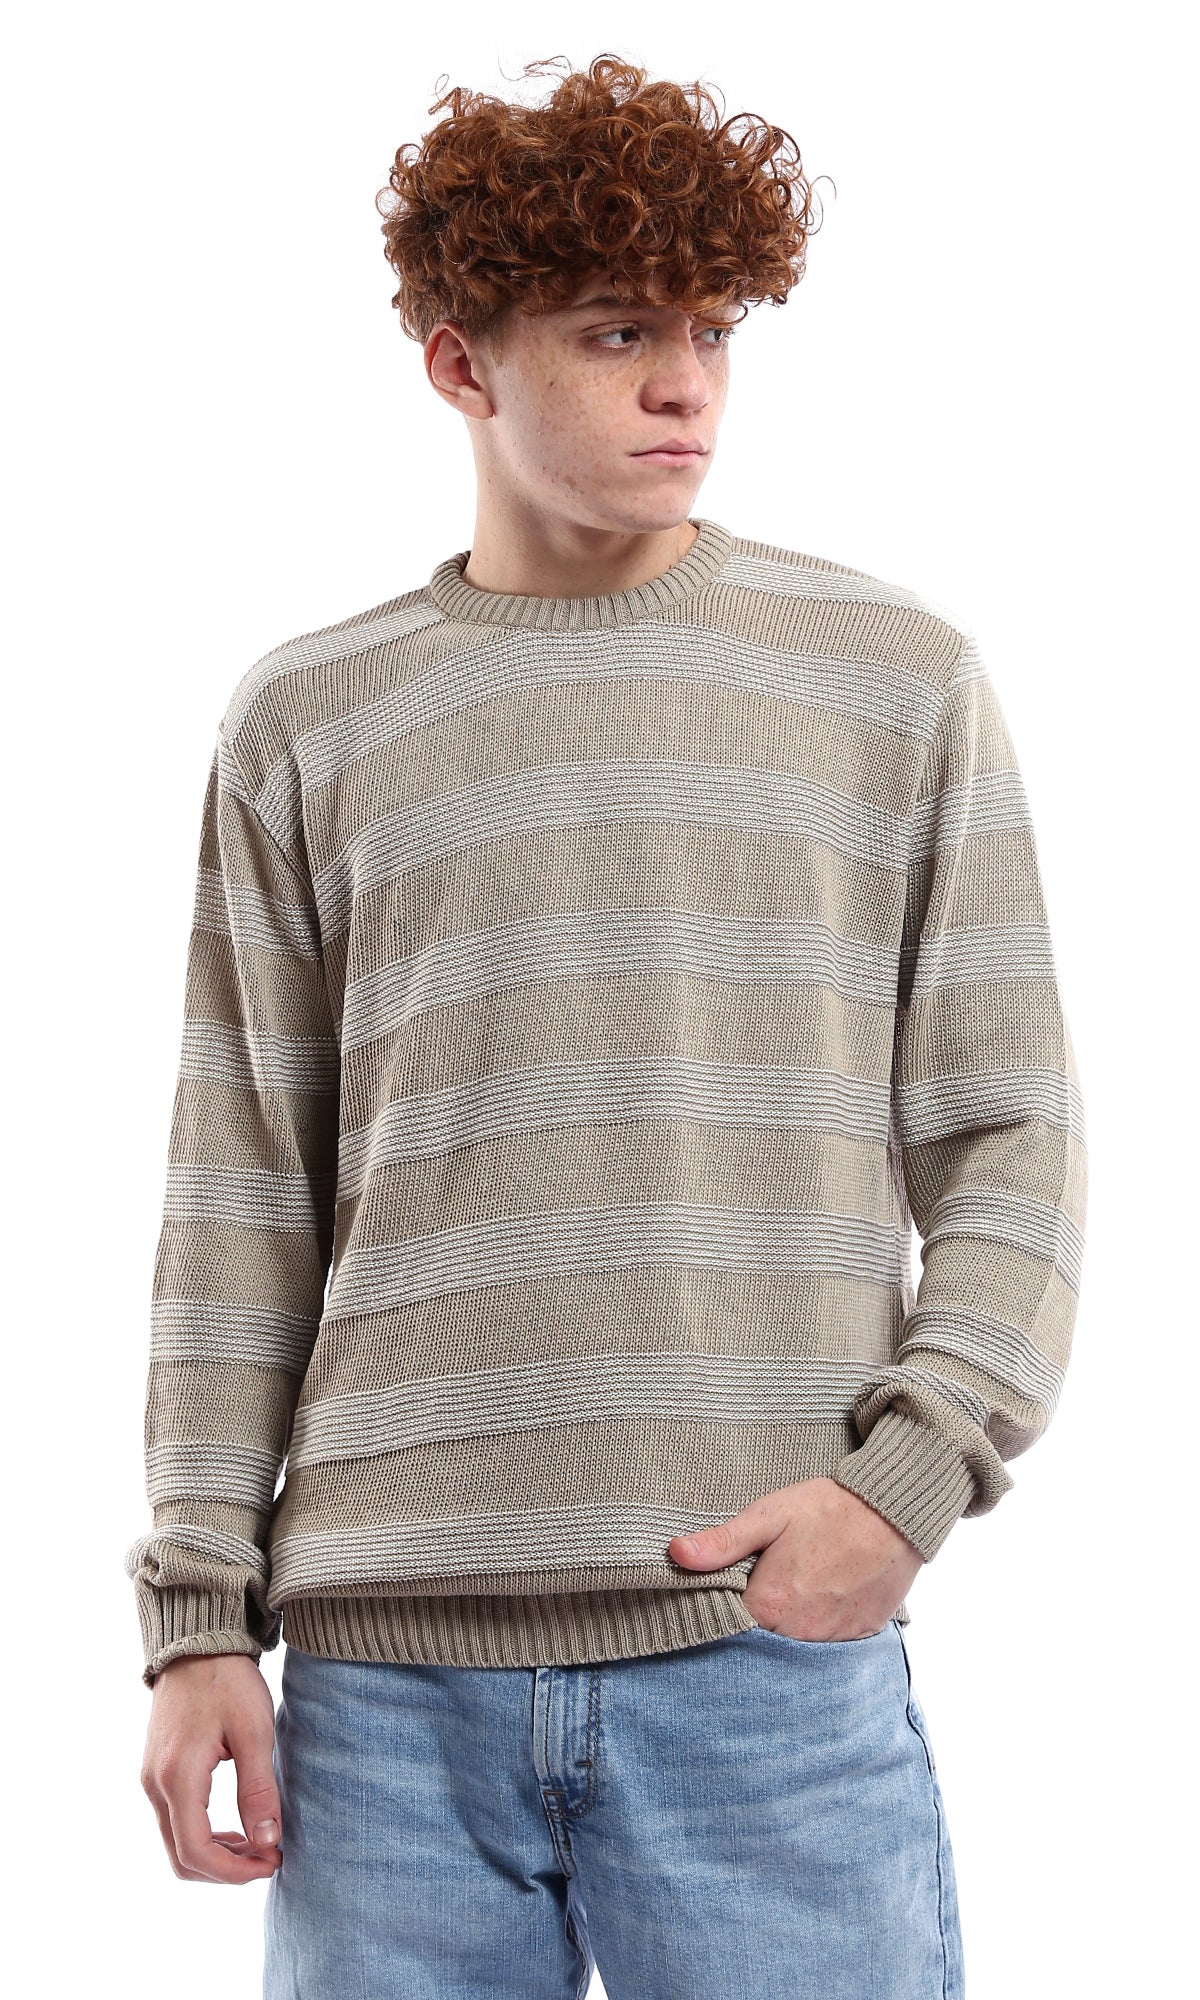 O173595 Knitted Light Taupe & White Relaxed Lightweight Pullover